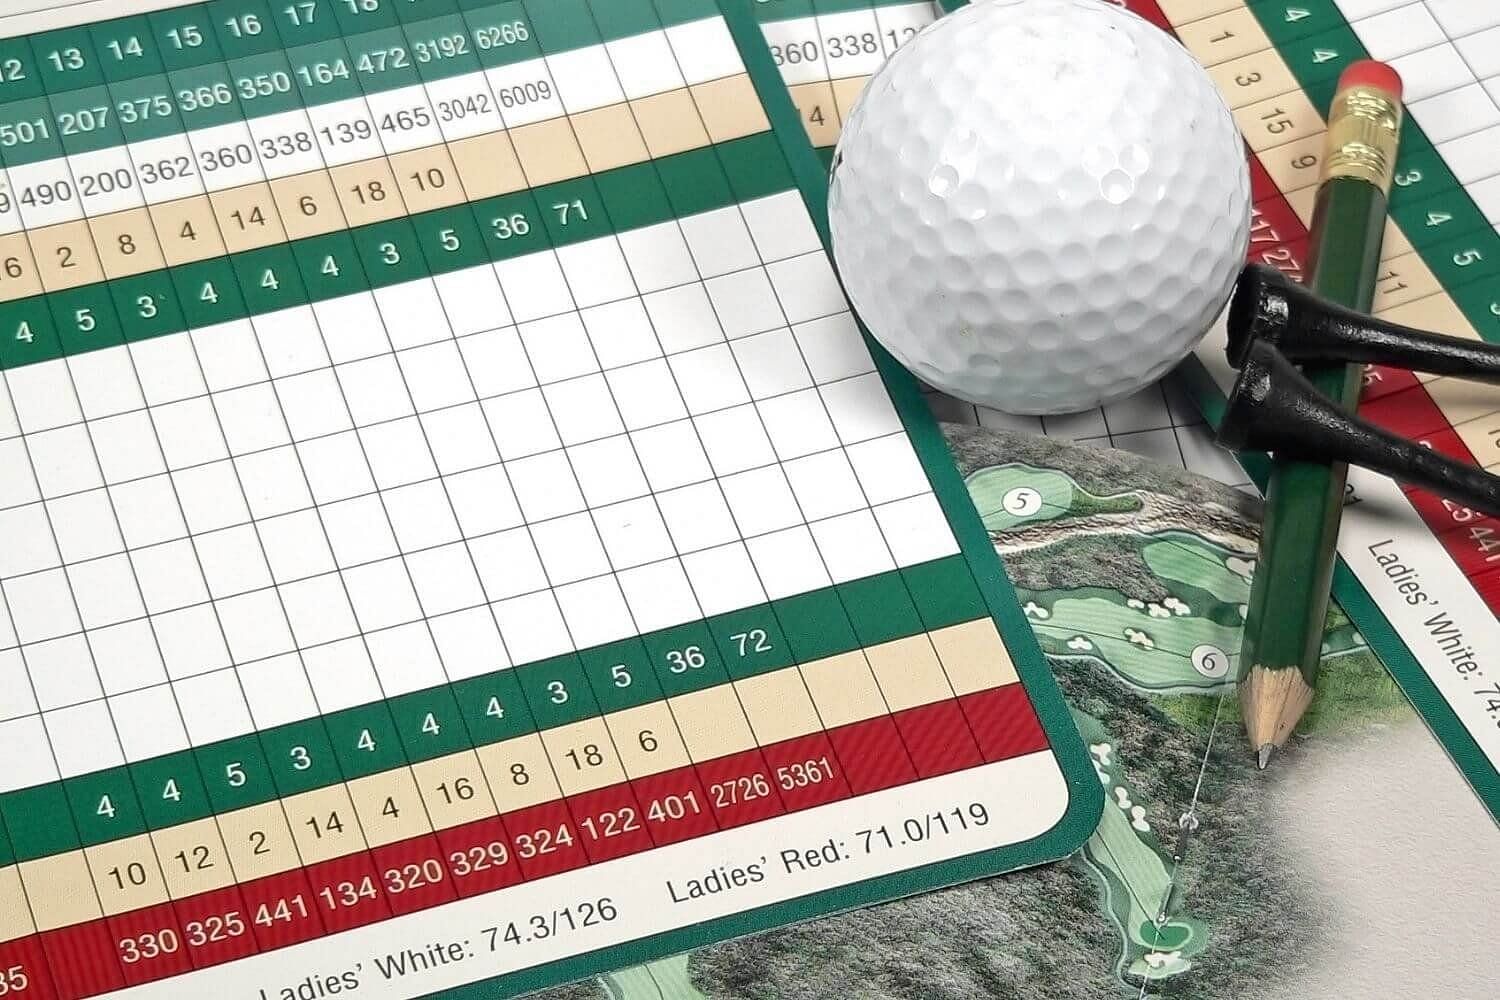 A golf scorecard with the course and slope rating mentioned in the bottom right (via HowSheGolfs.com)